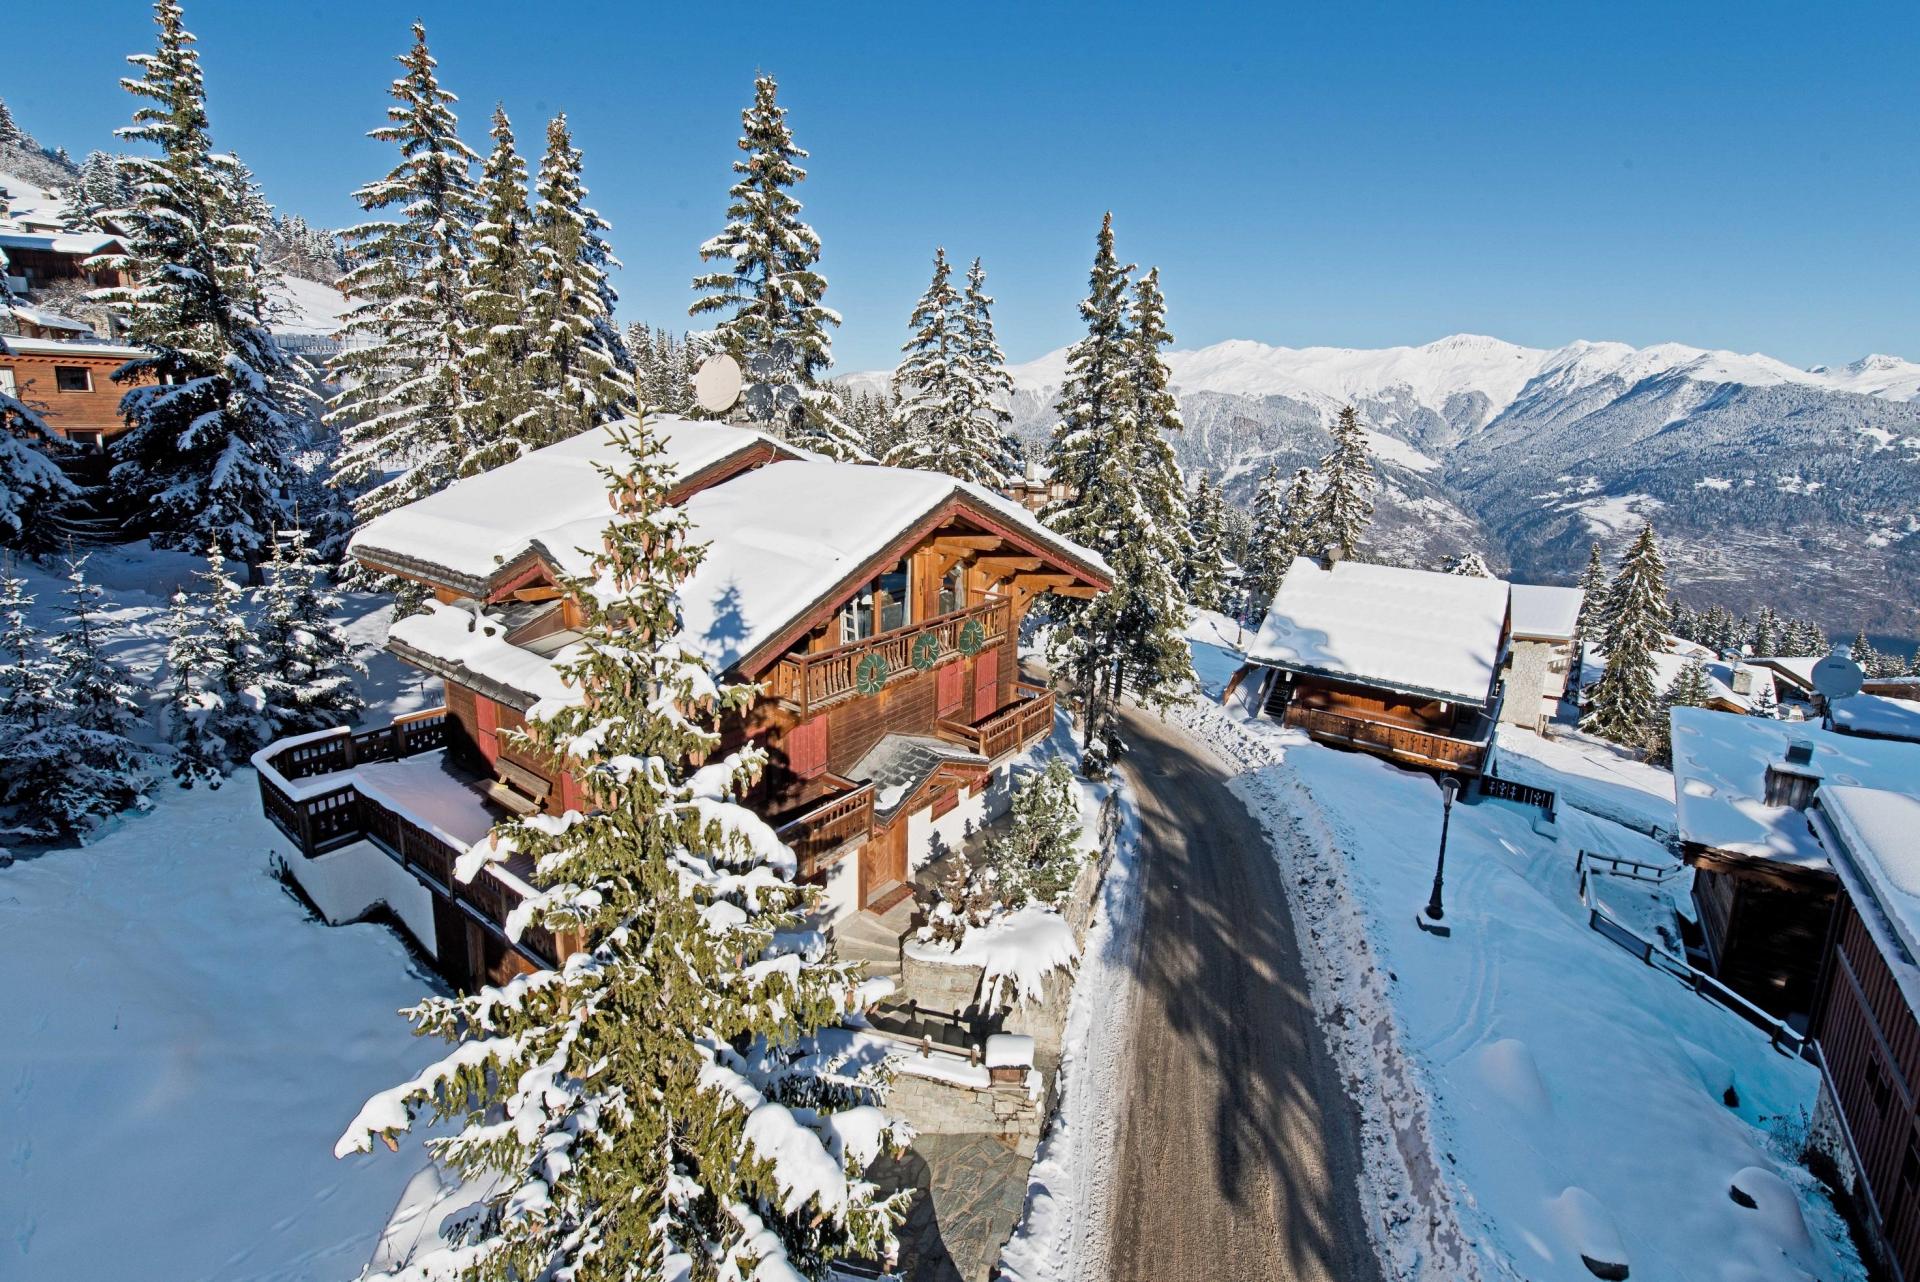 CHALET DES SAPINS IS A NICE WINTER HOLIDAY RENTAL IN THE FRENCH ALPS